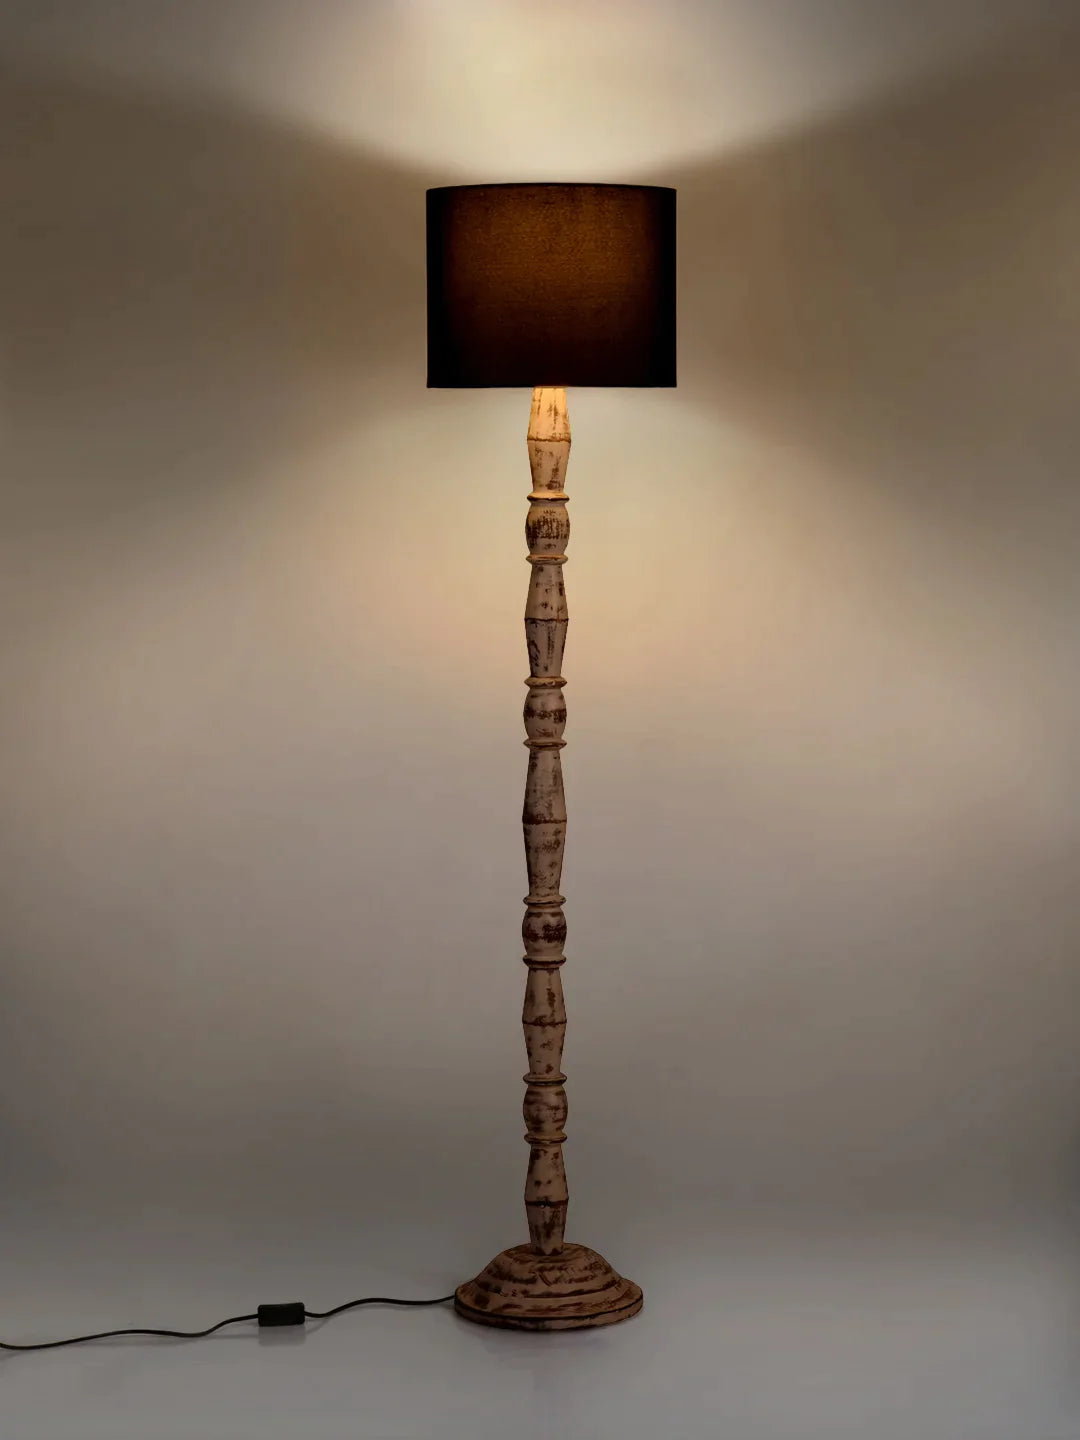 Distress White Floor Lamp with Black Cotton Shade